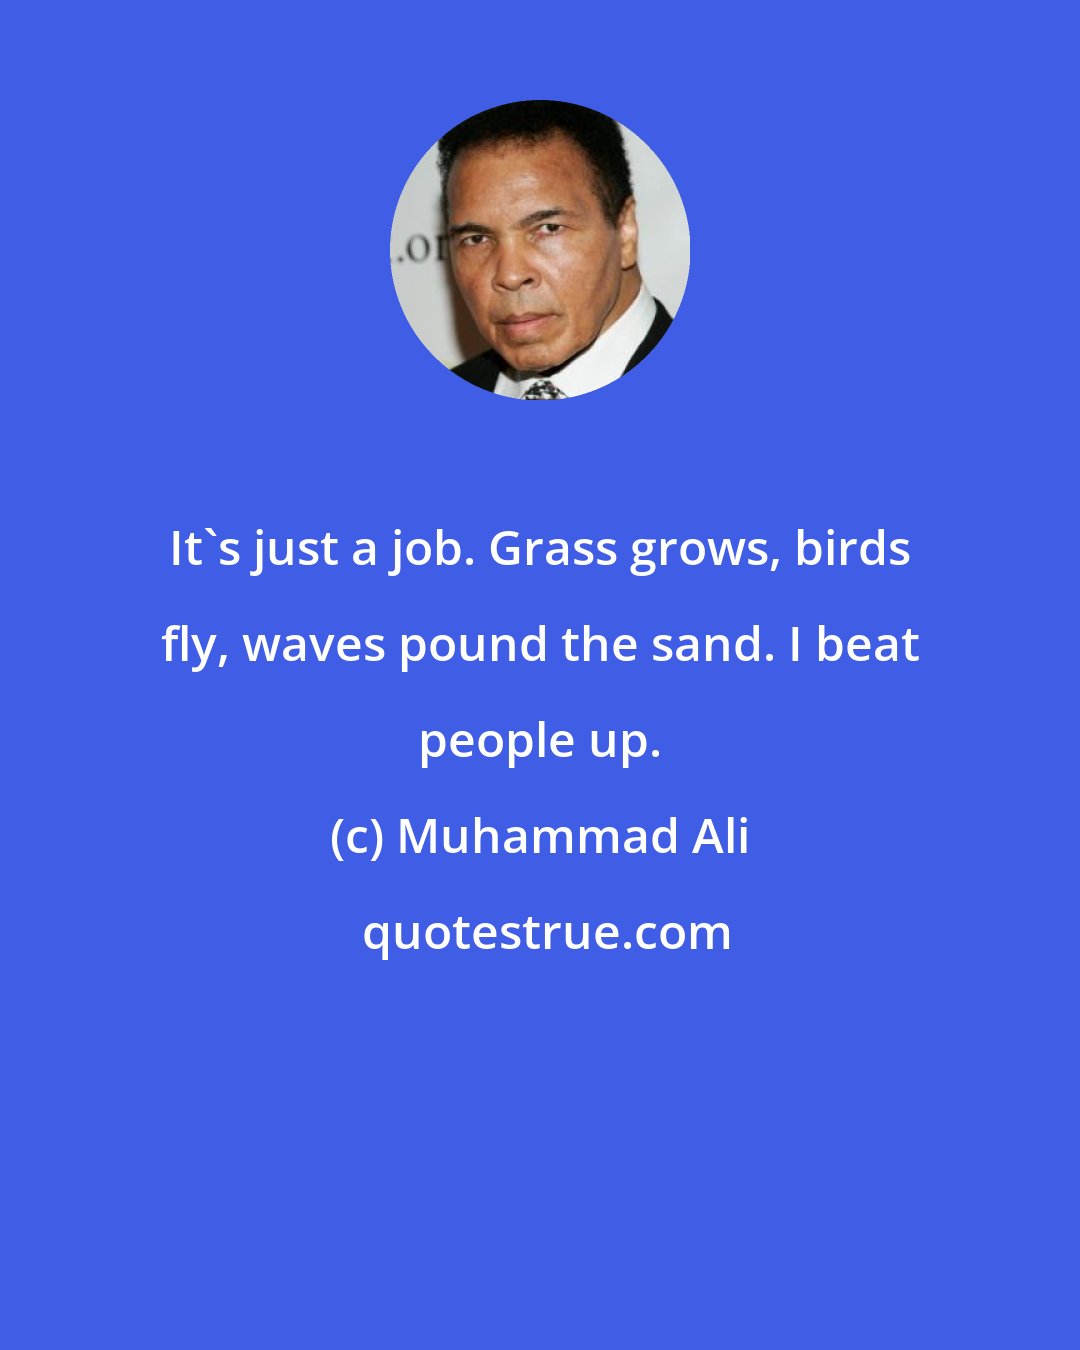 Muhammad Ali: It's just a job. Grass grows, birds fly, waves pound the sand. I beat people up.